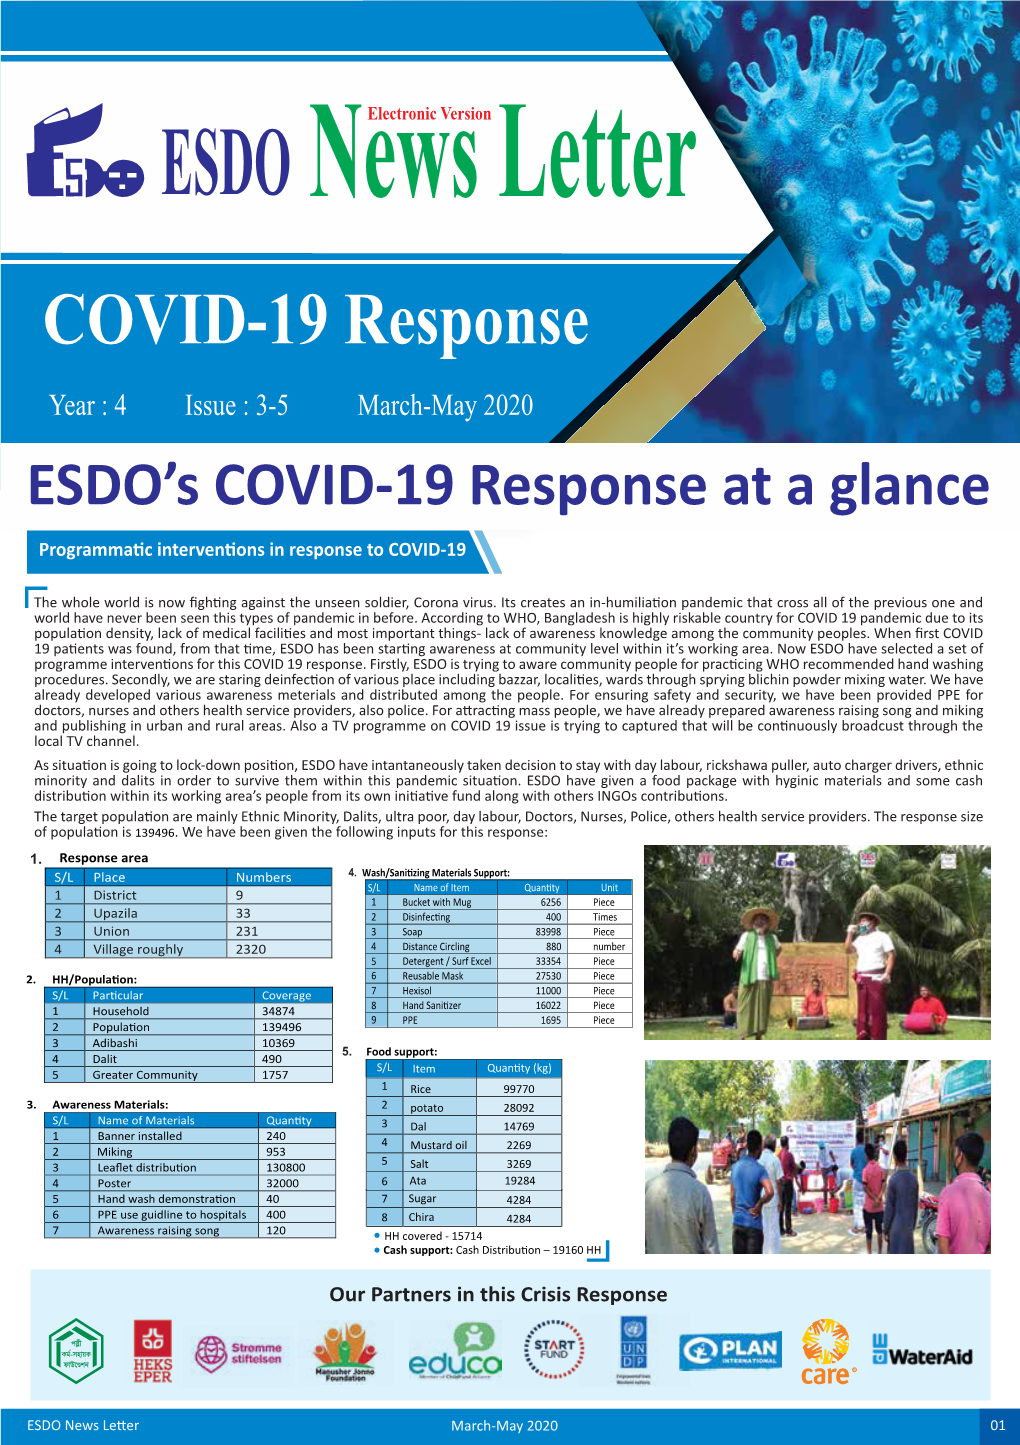 News Letter COVID-19 Response Year : 4 Issue : 3-5 March-May 2020 ESDO’S COVID-19 Response at a Glance Programmatic Interventions in Response to COVID-19